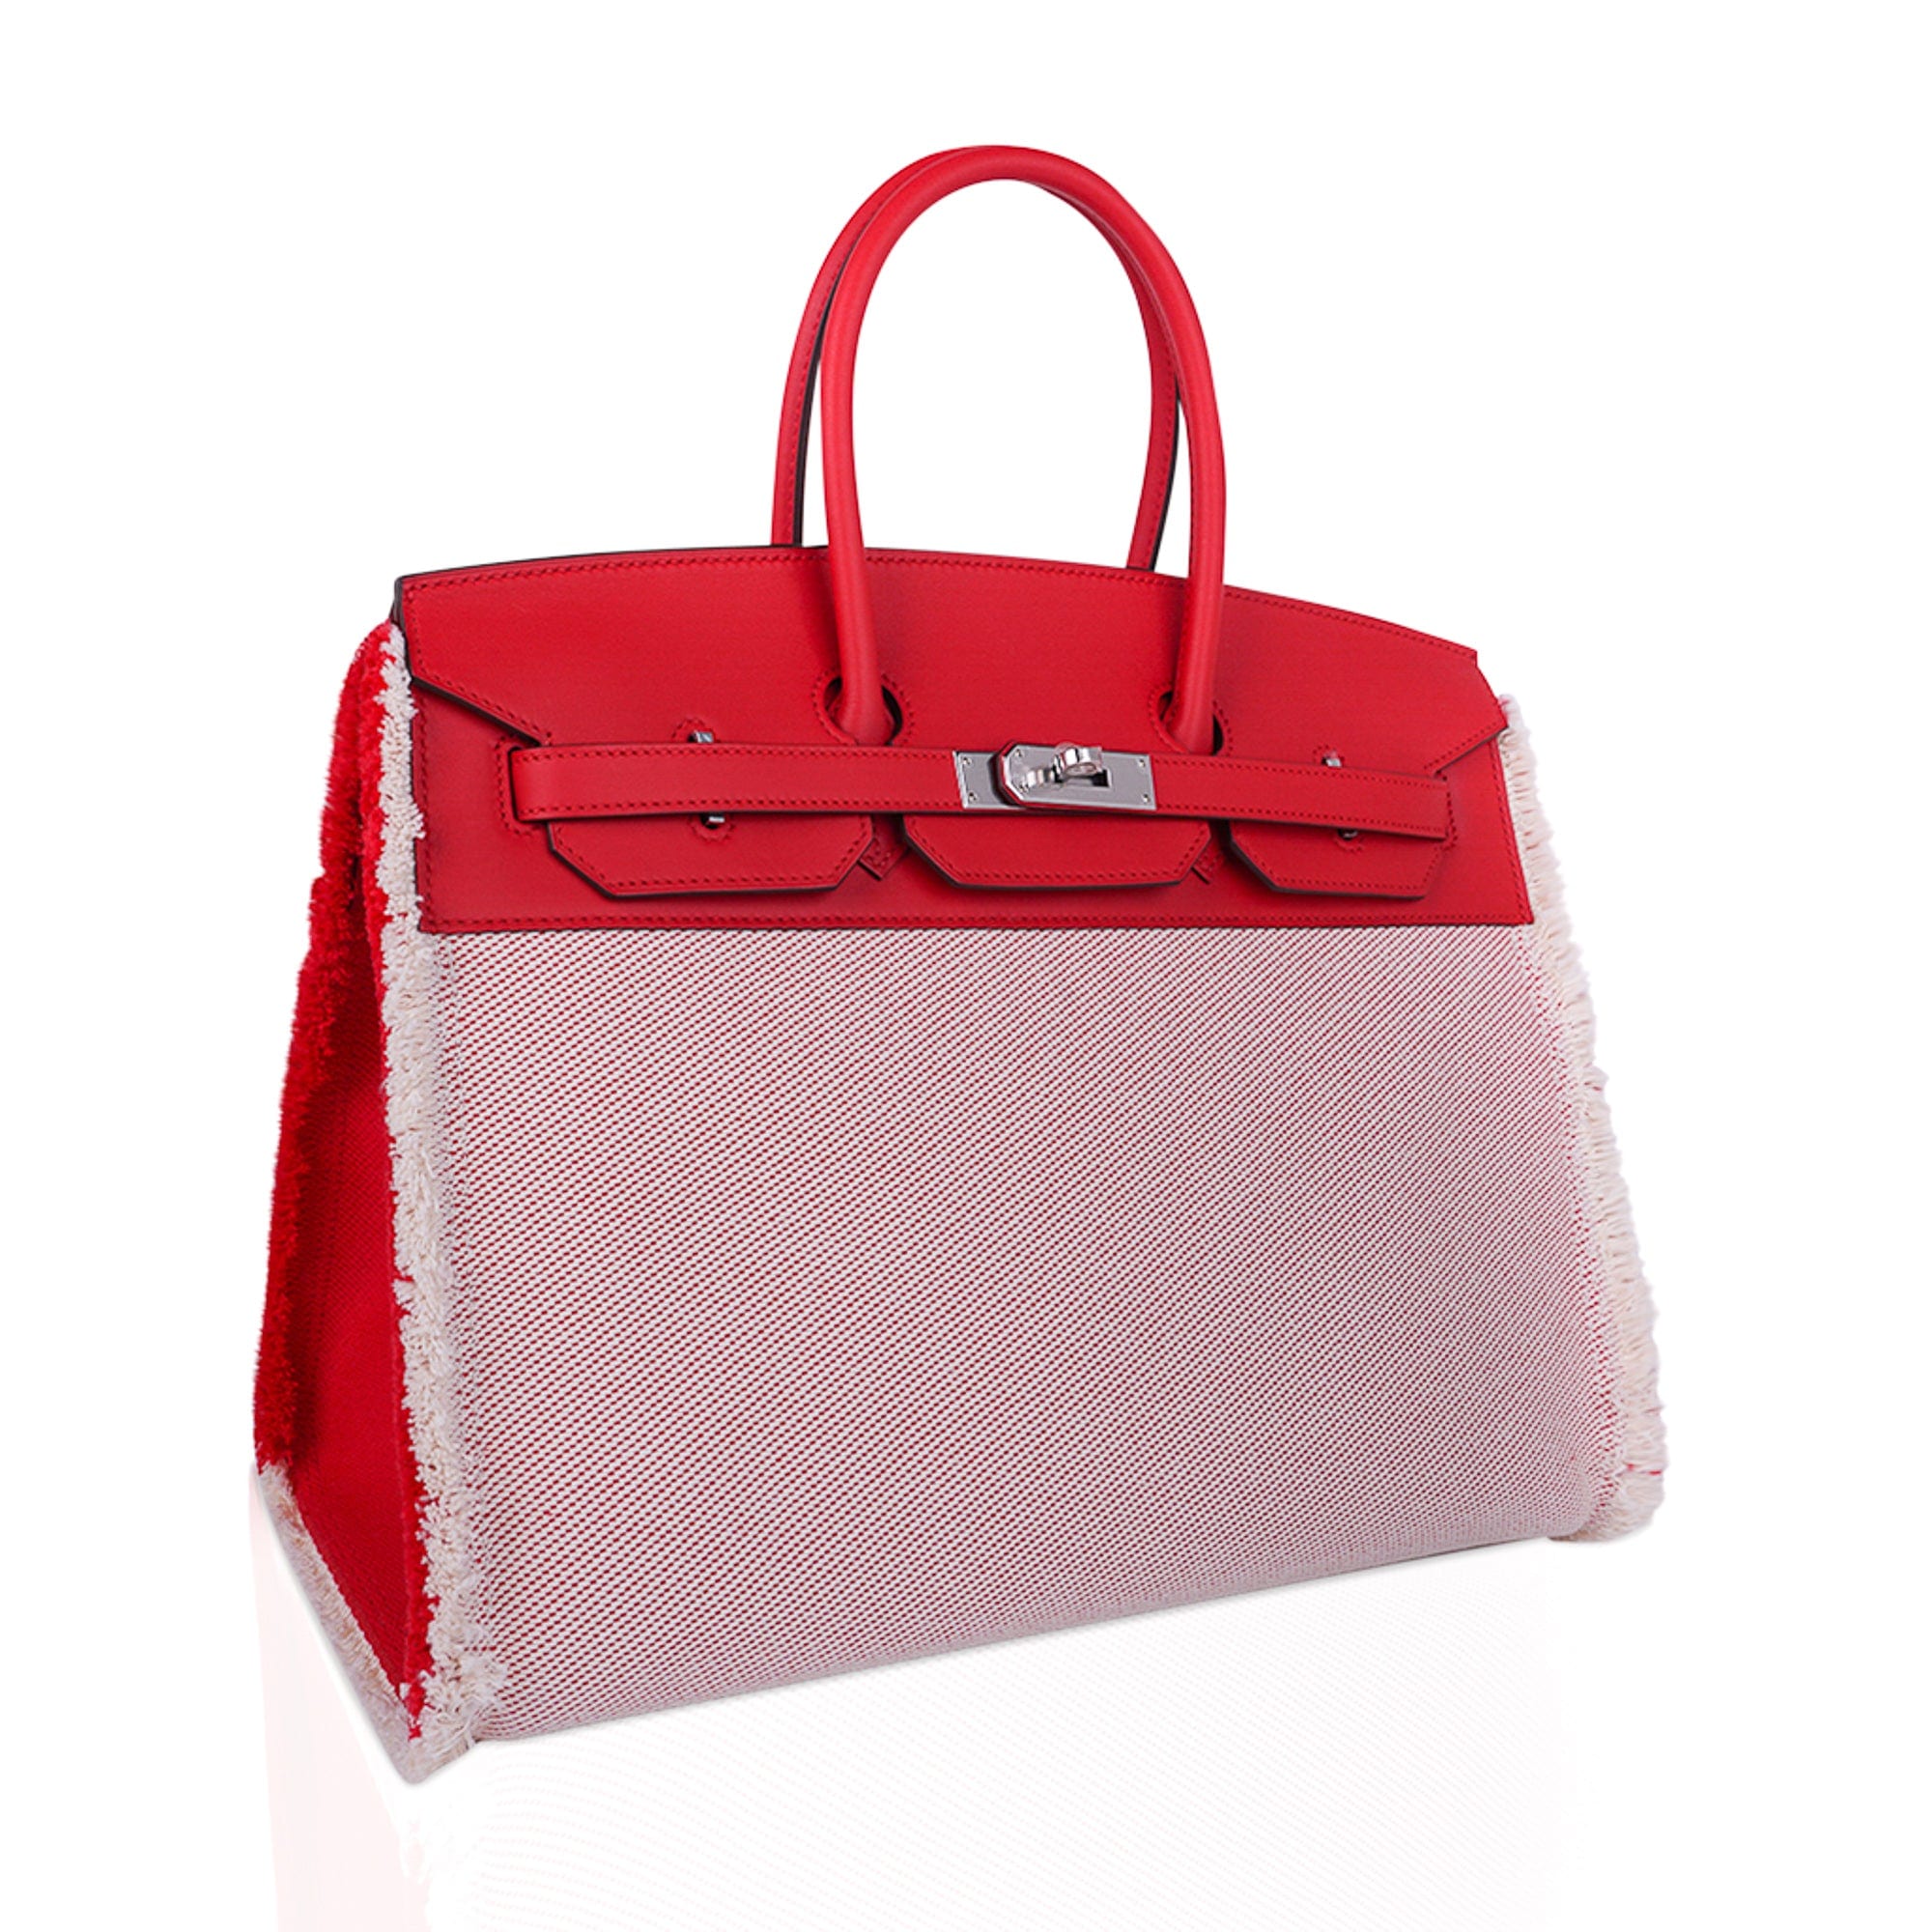 Hermes Limited Edition Birkin 35 Bag Faubourg Tropical Toile